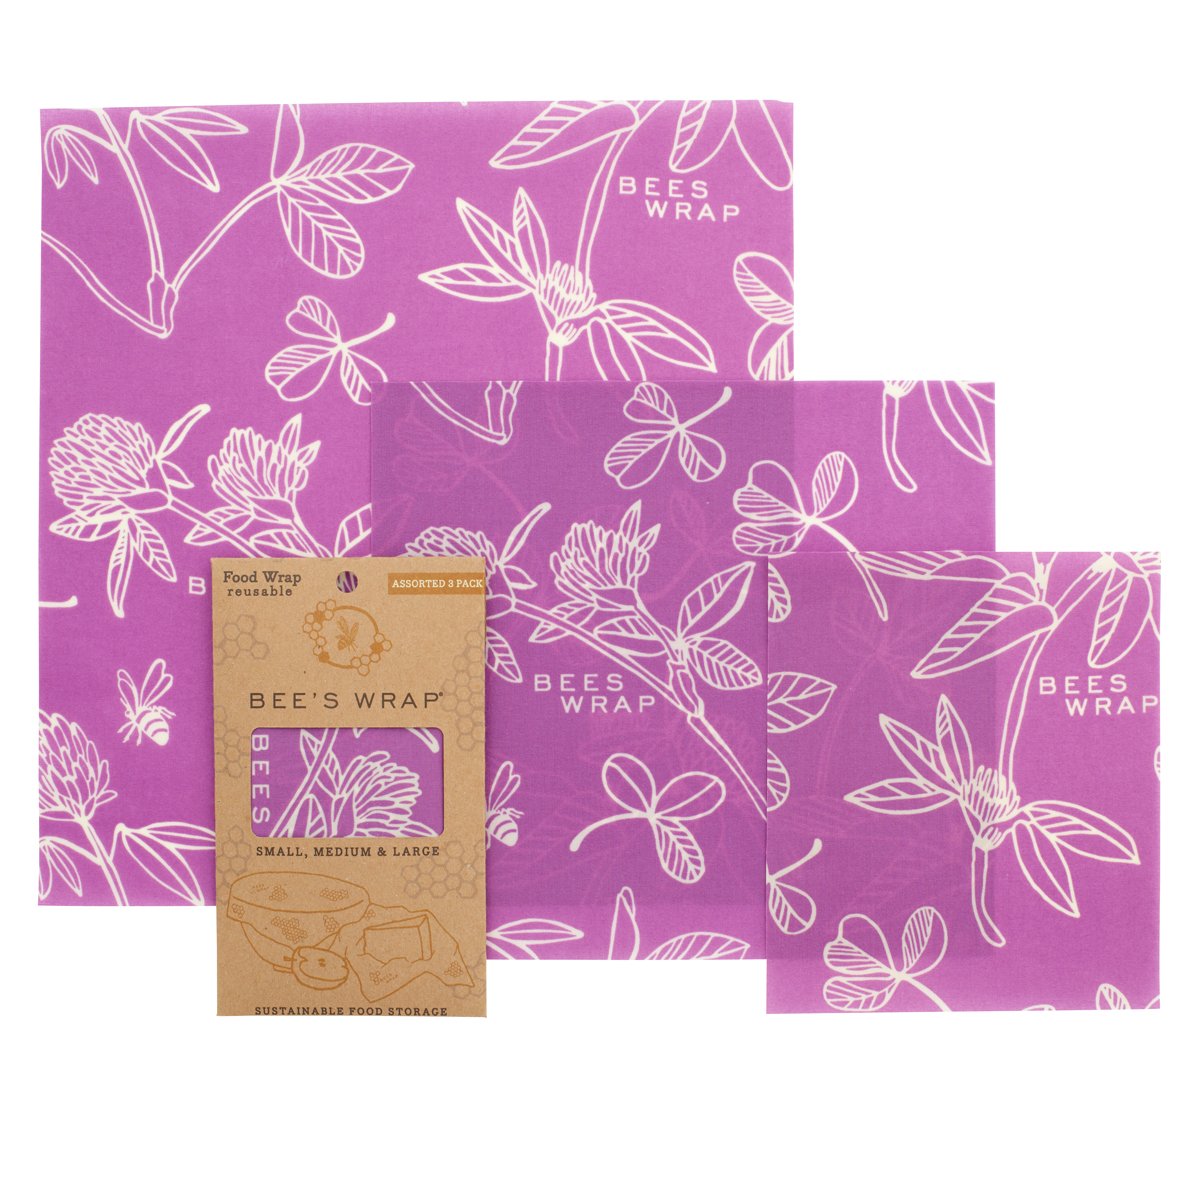 Wrap Mix Pack-3 Bee's Wrap